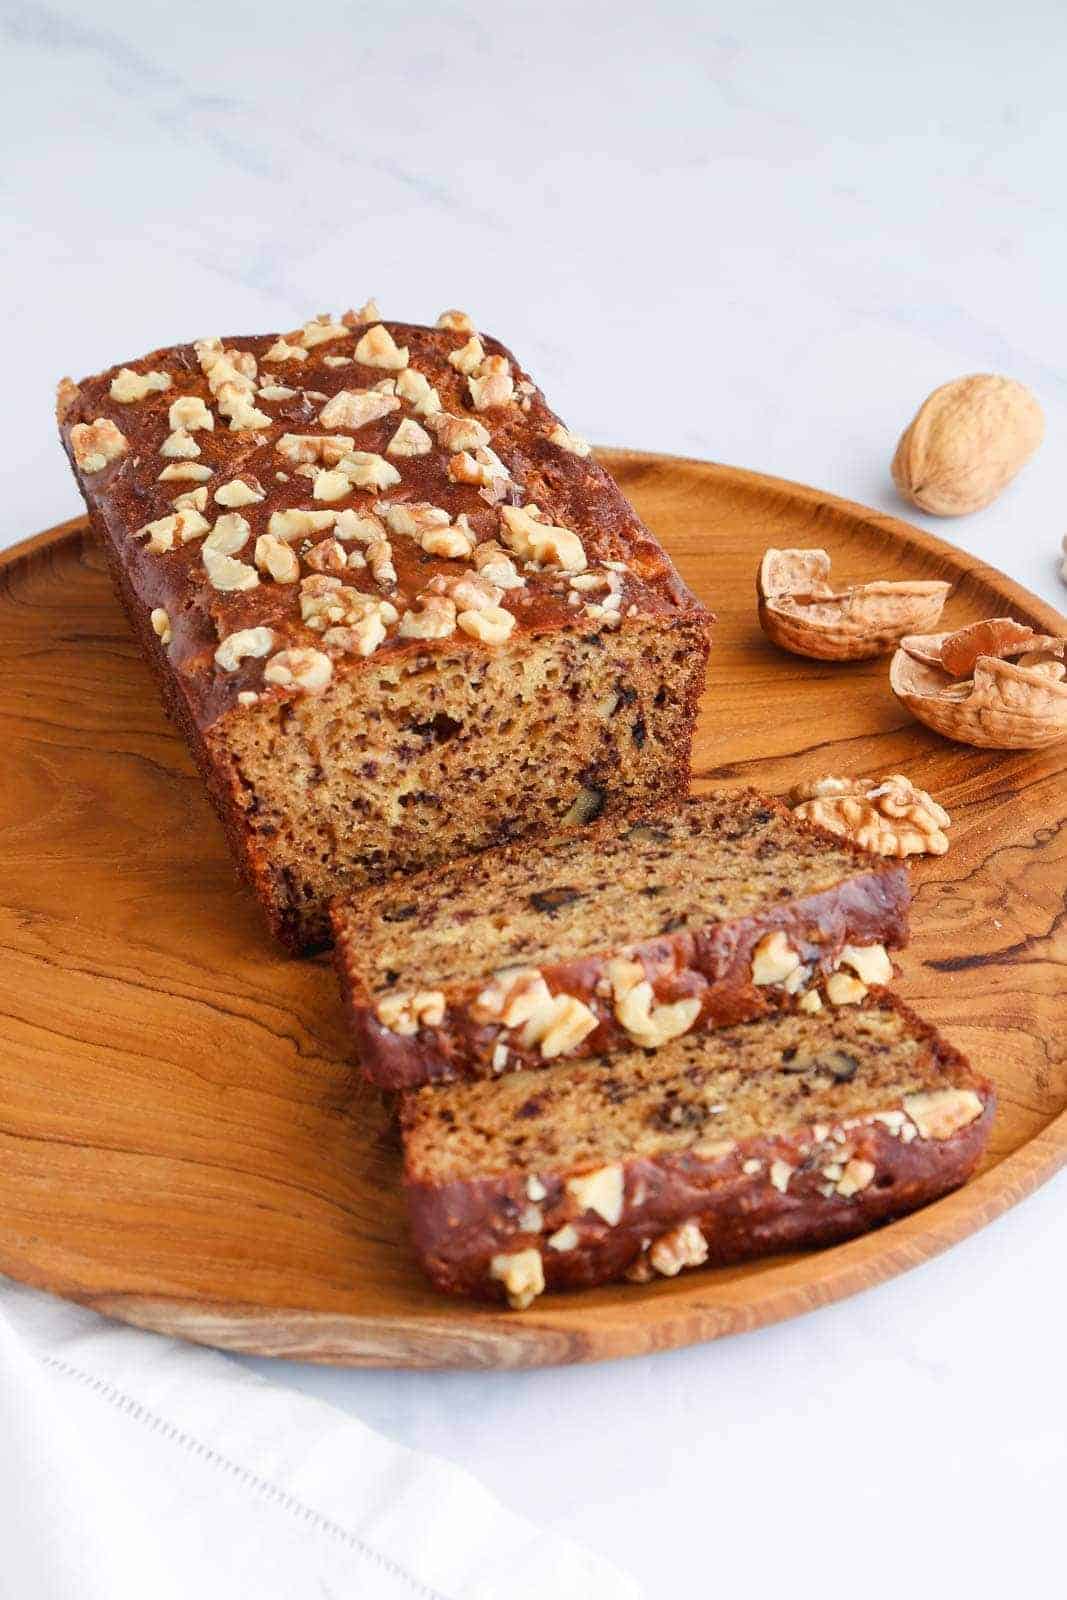 Delicious banana walnut bread served on w wooden plate.